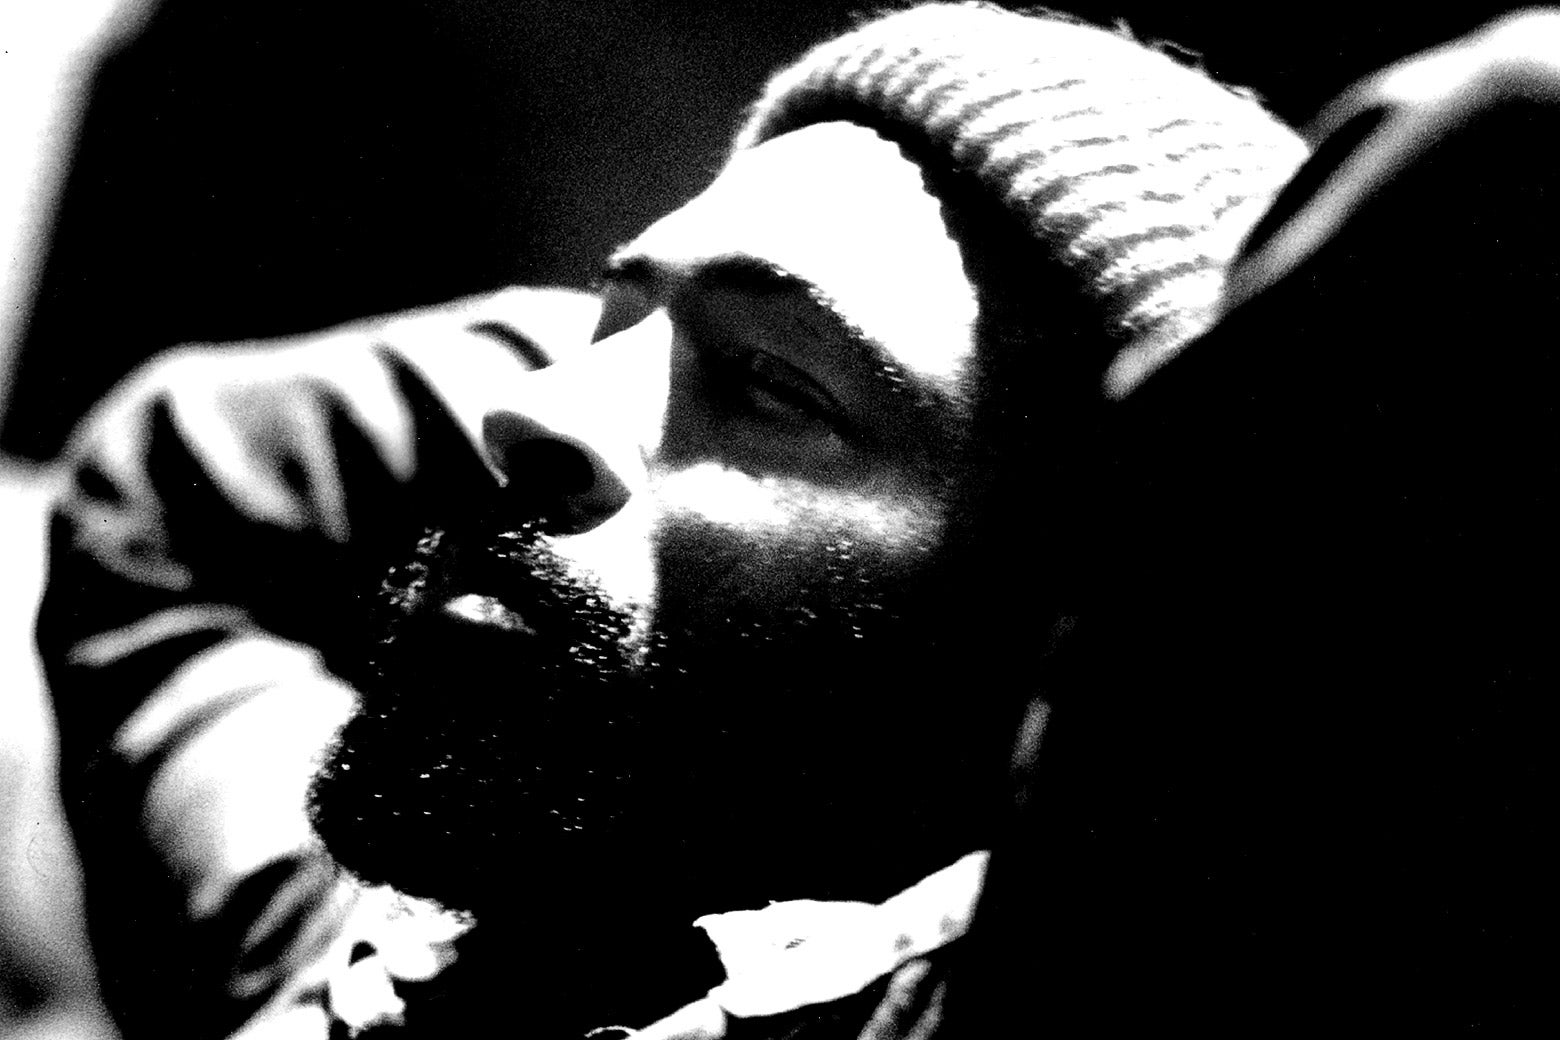 Marvin Gaye relaxes in the studio on Aug. 28, 1973.